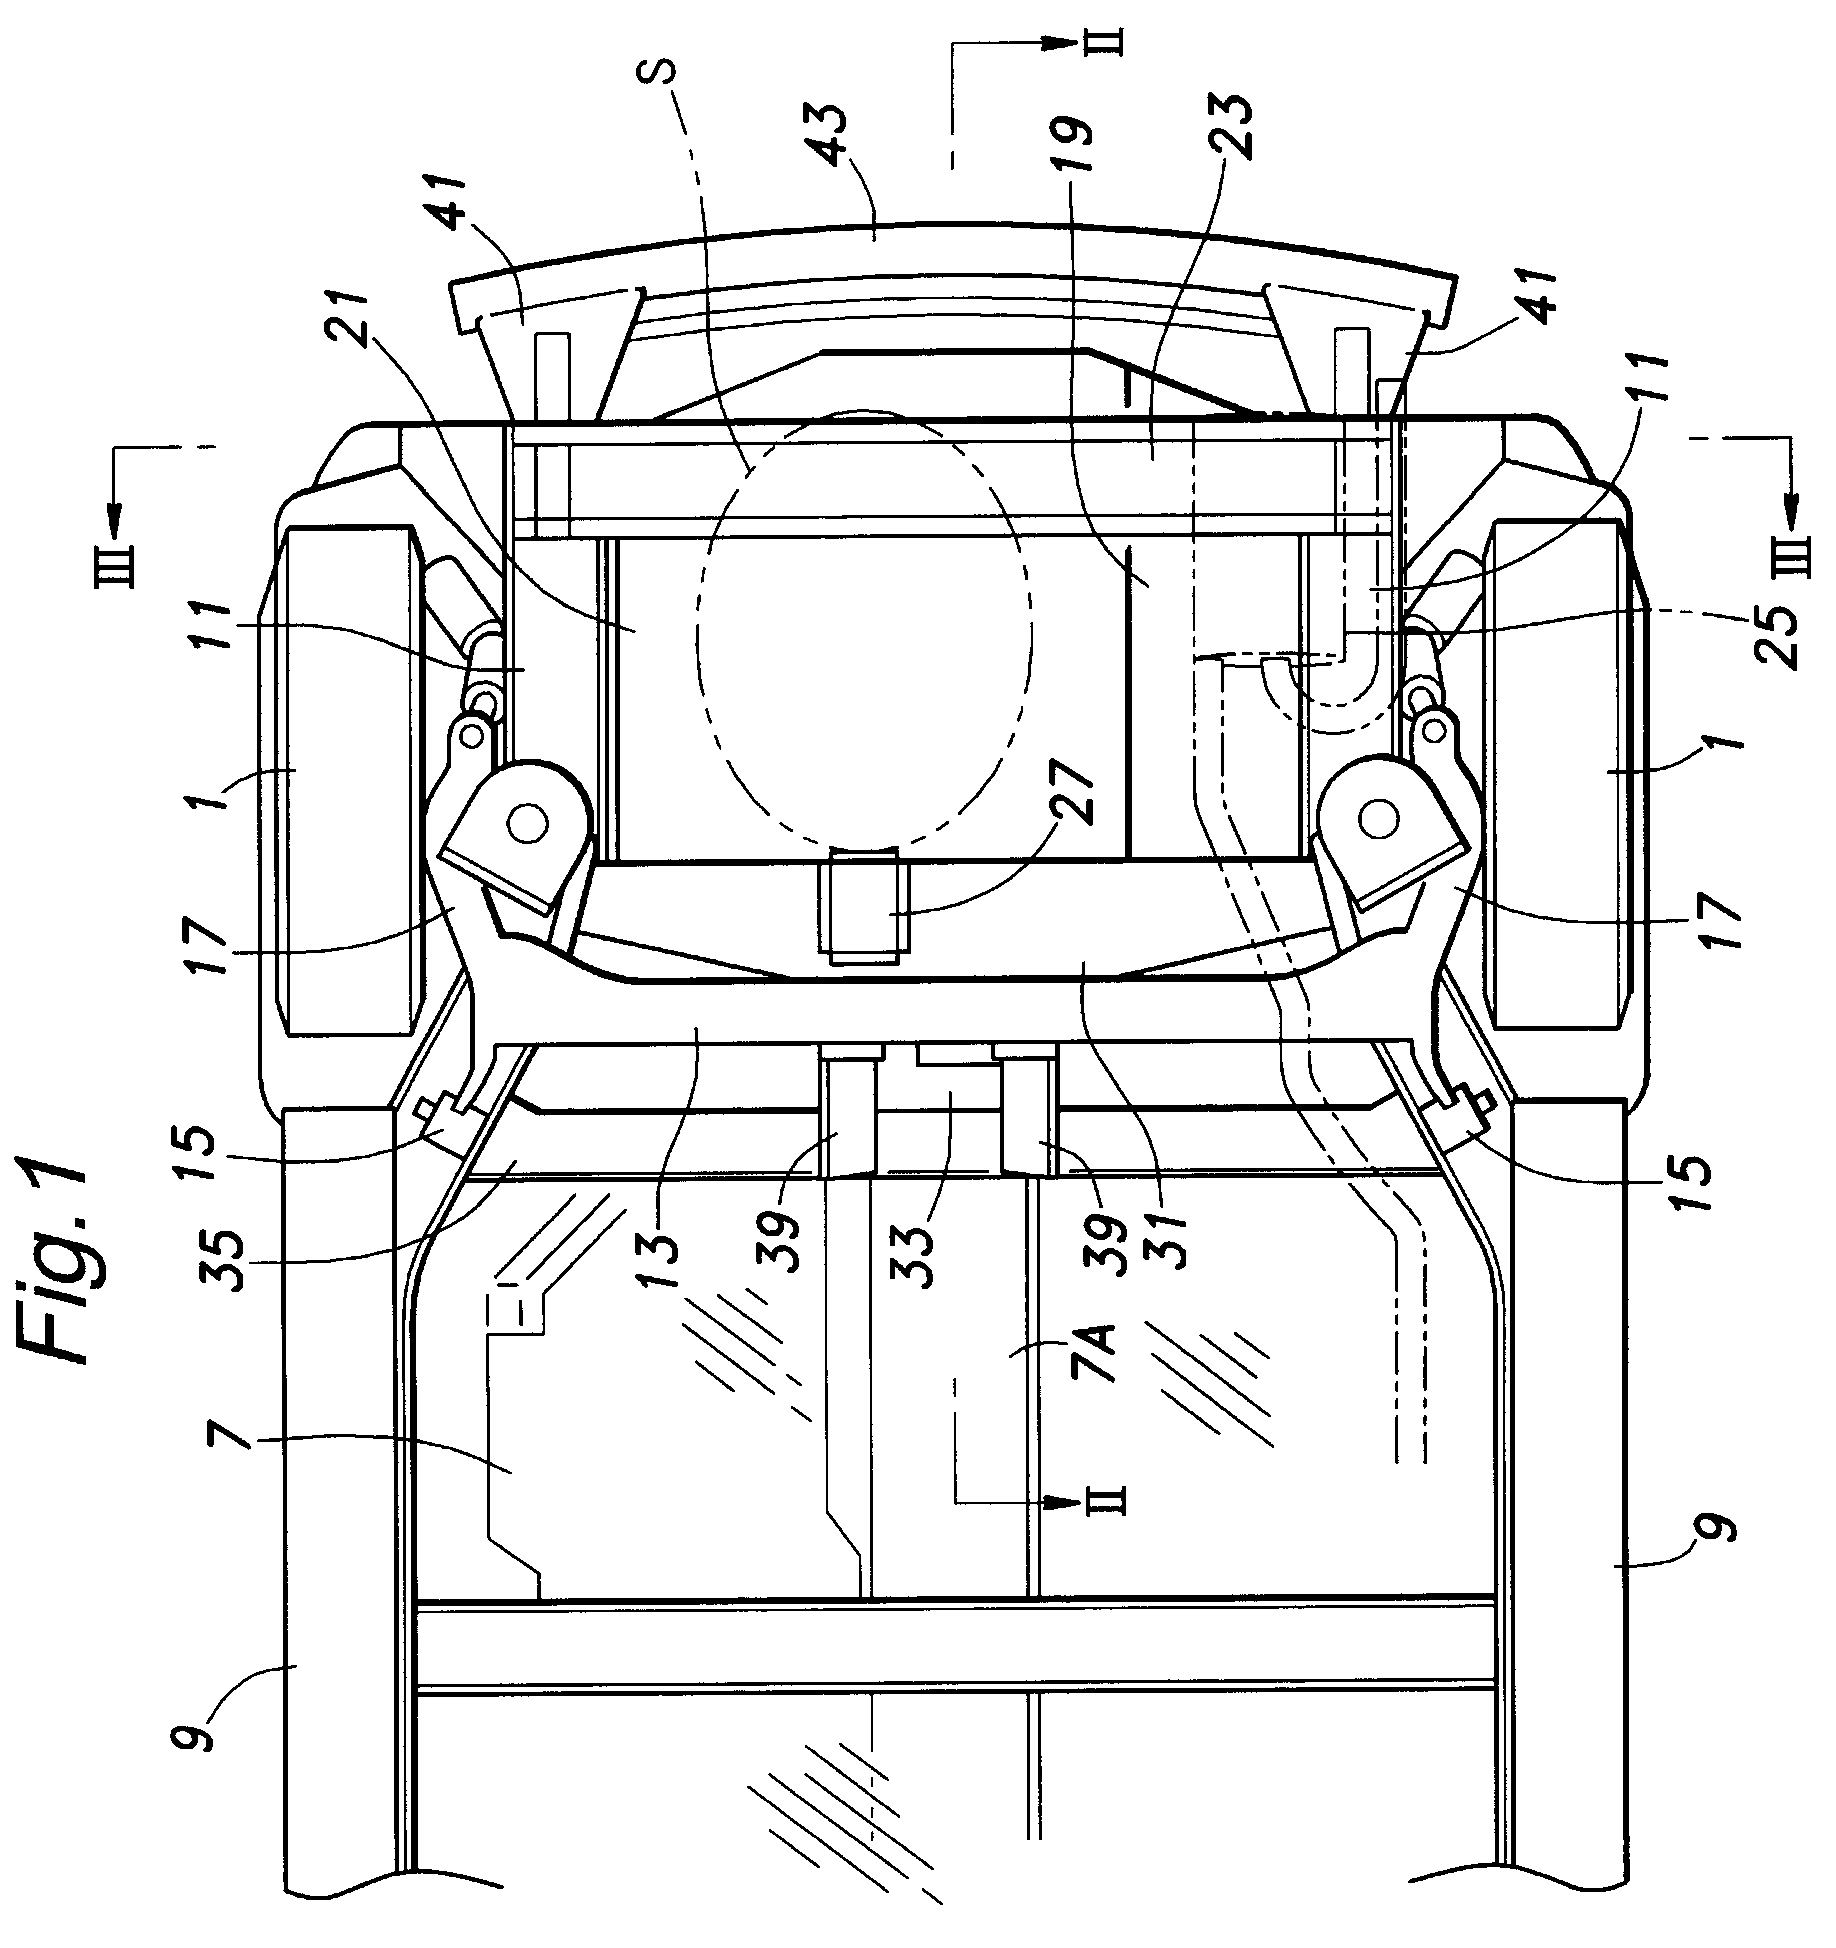 Rear vehicle body structure